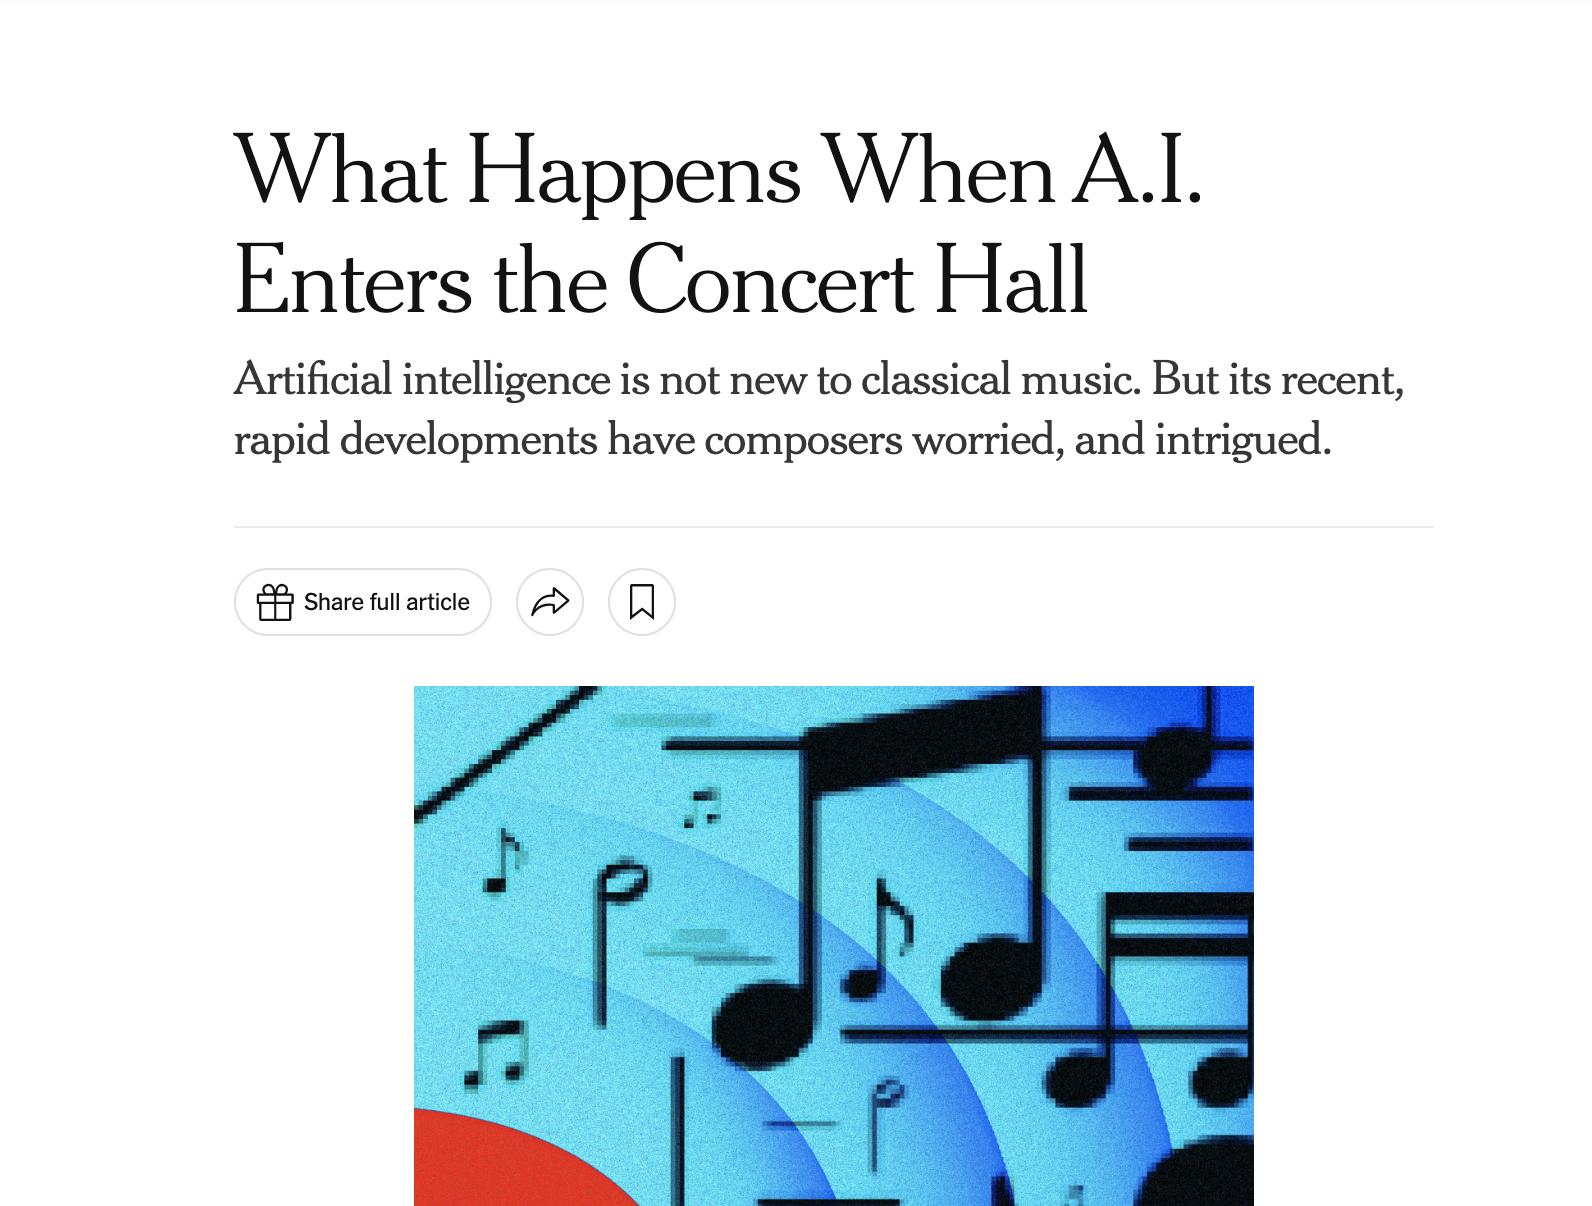 screenshot of the webpage hosting the article, with the title "What happens when AI enters the concert hall" and a picture of balck music notes on a light blue background